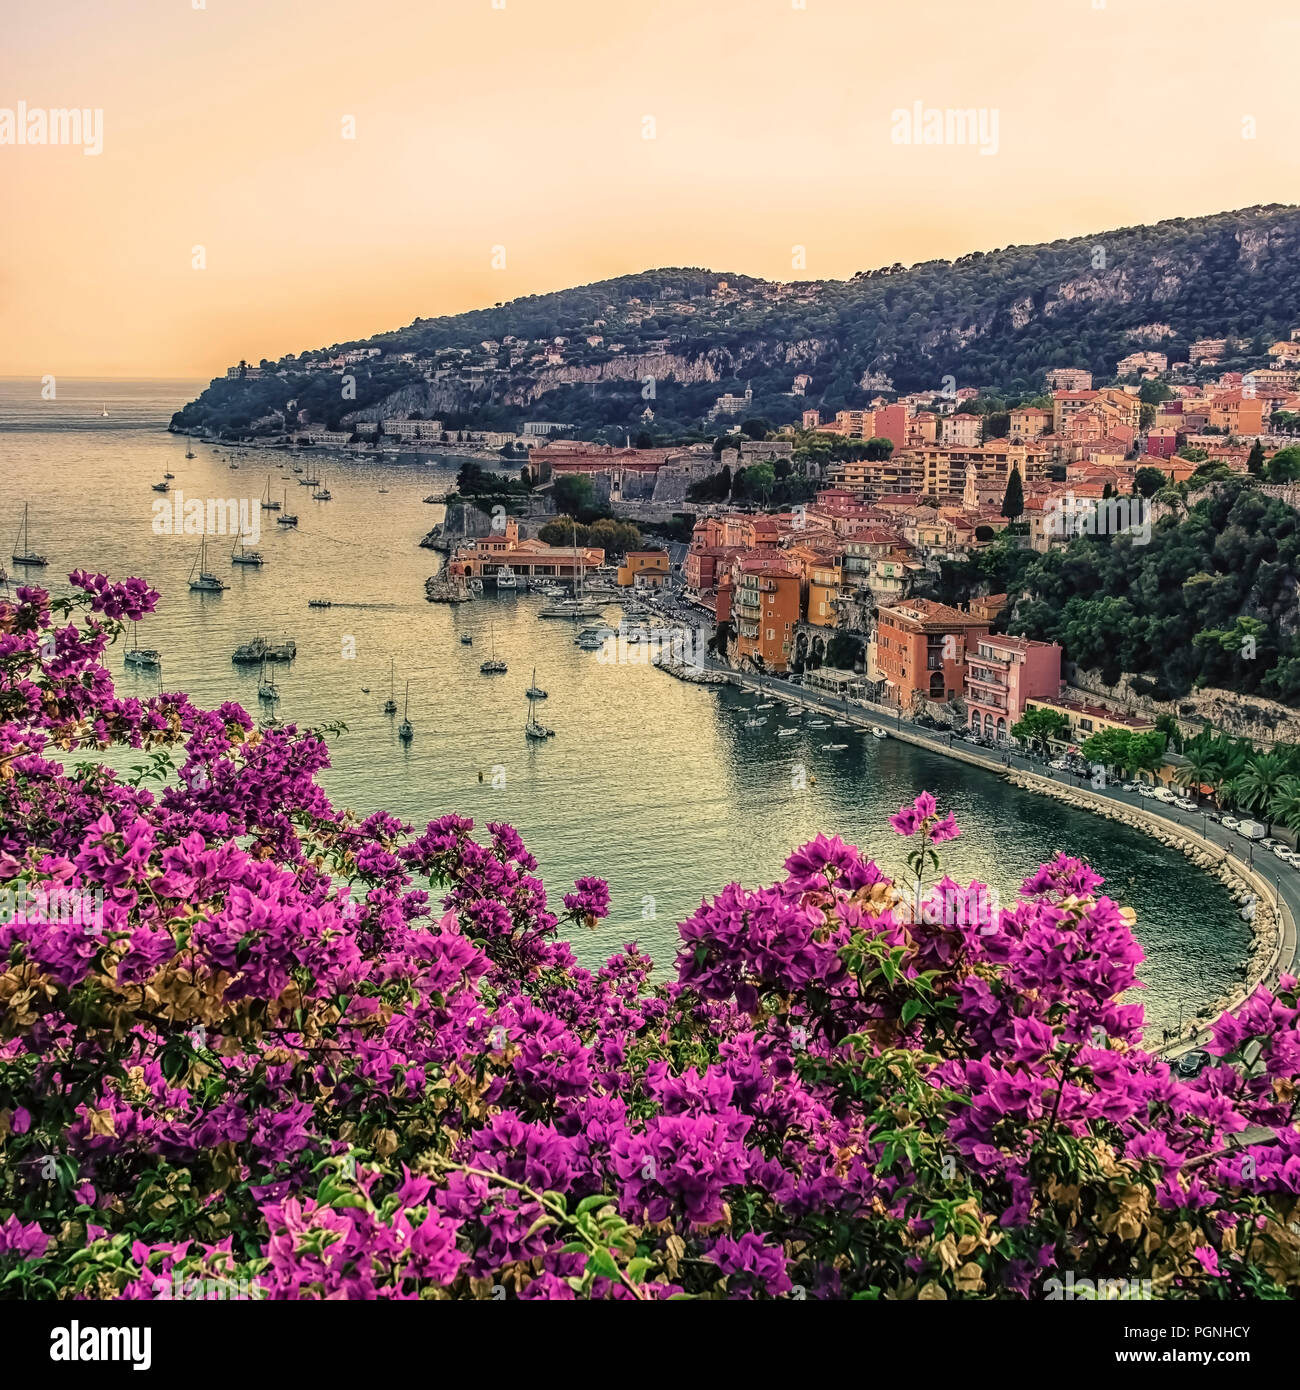 Villefranche-Sur-Mer on the French Riviera Stock Photo